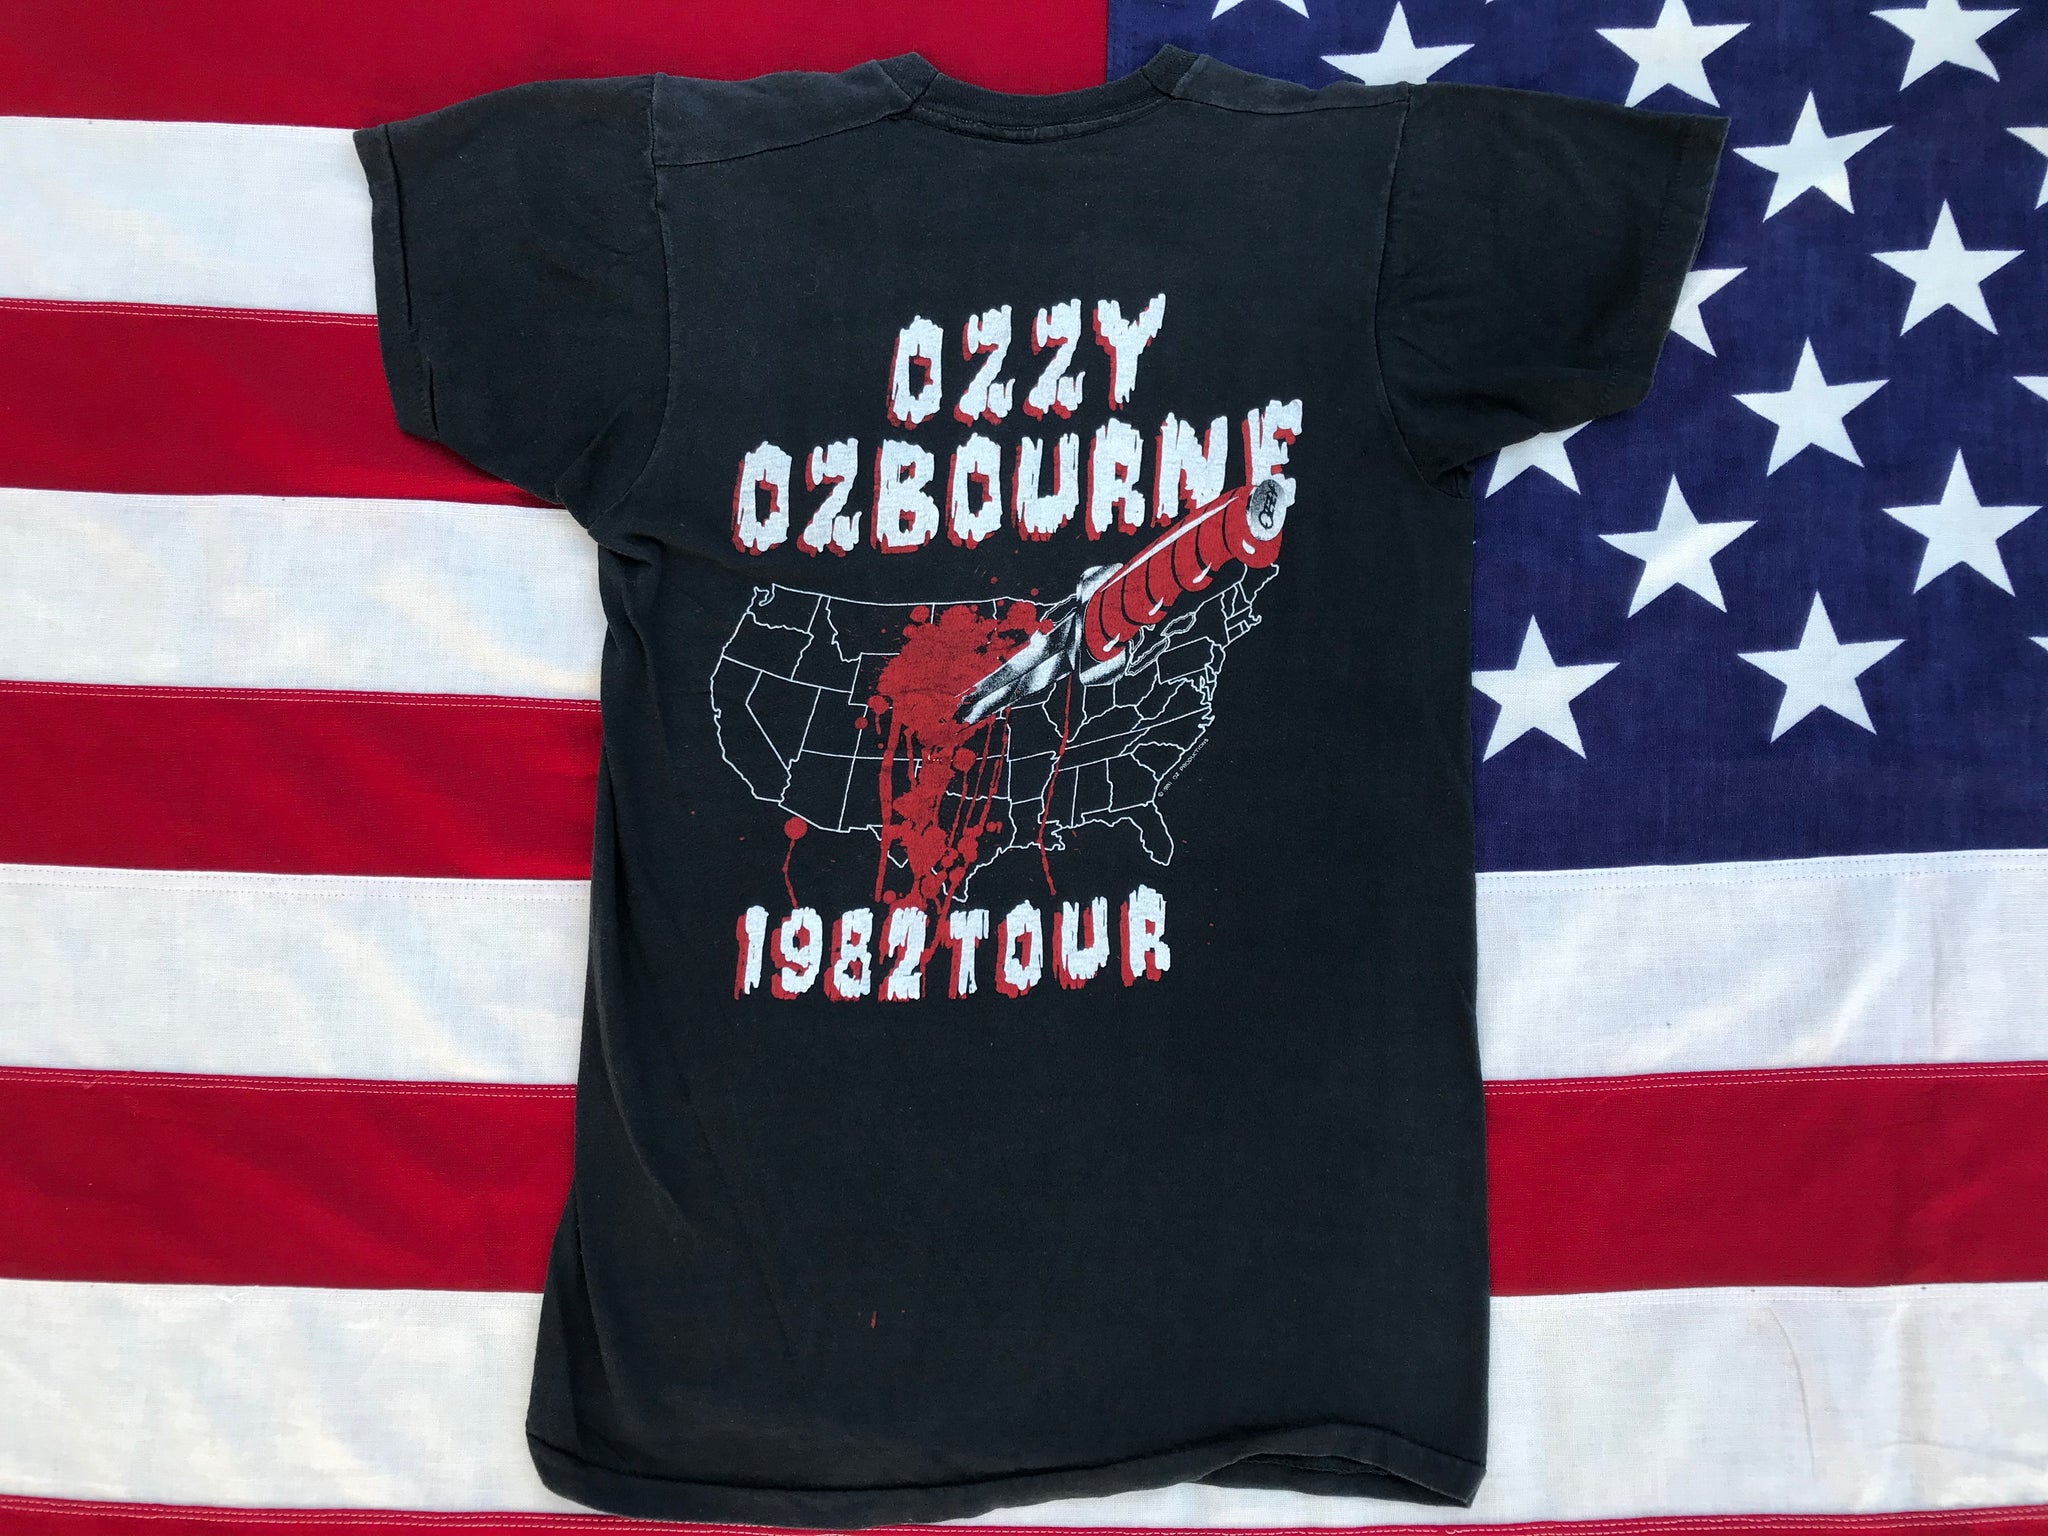 OZZY Osborne 1982 Tour Original Vintage Rock T-Shirt by Screen Stars Made in USA